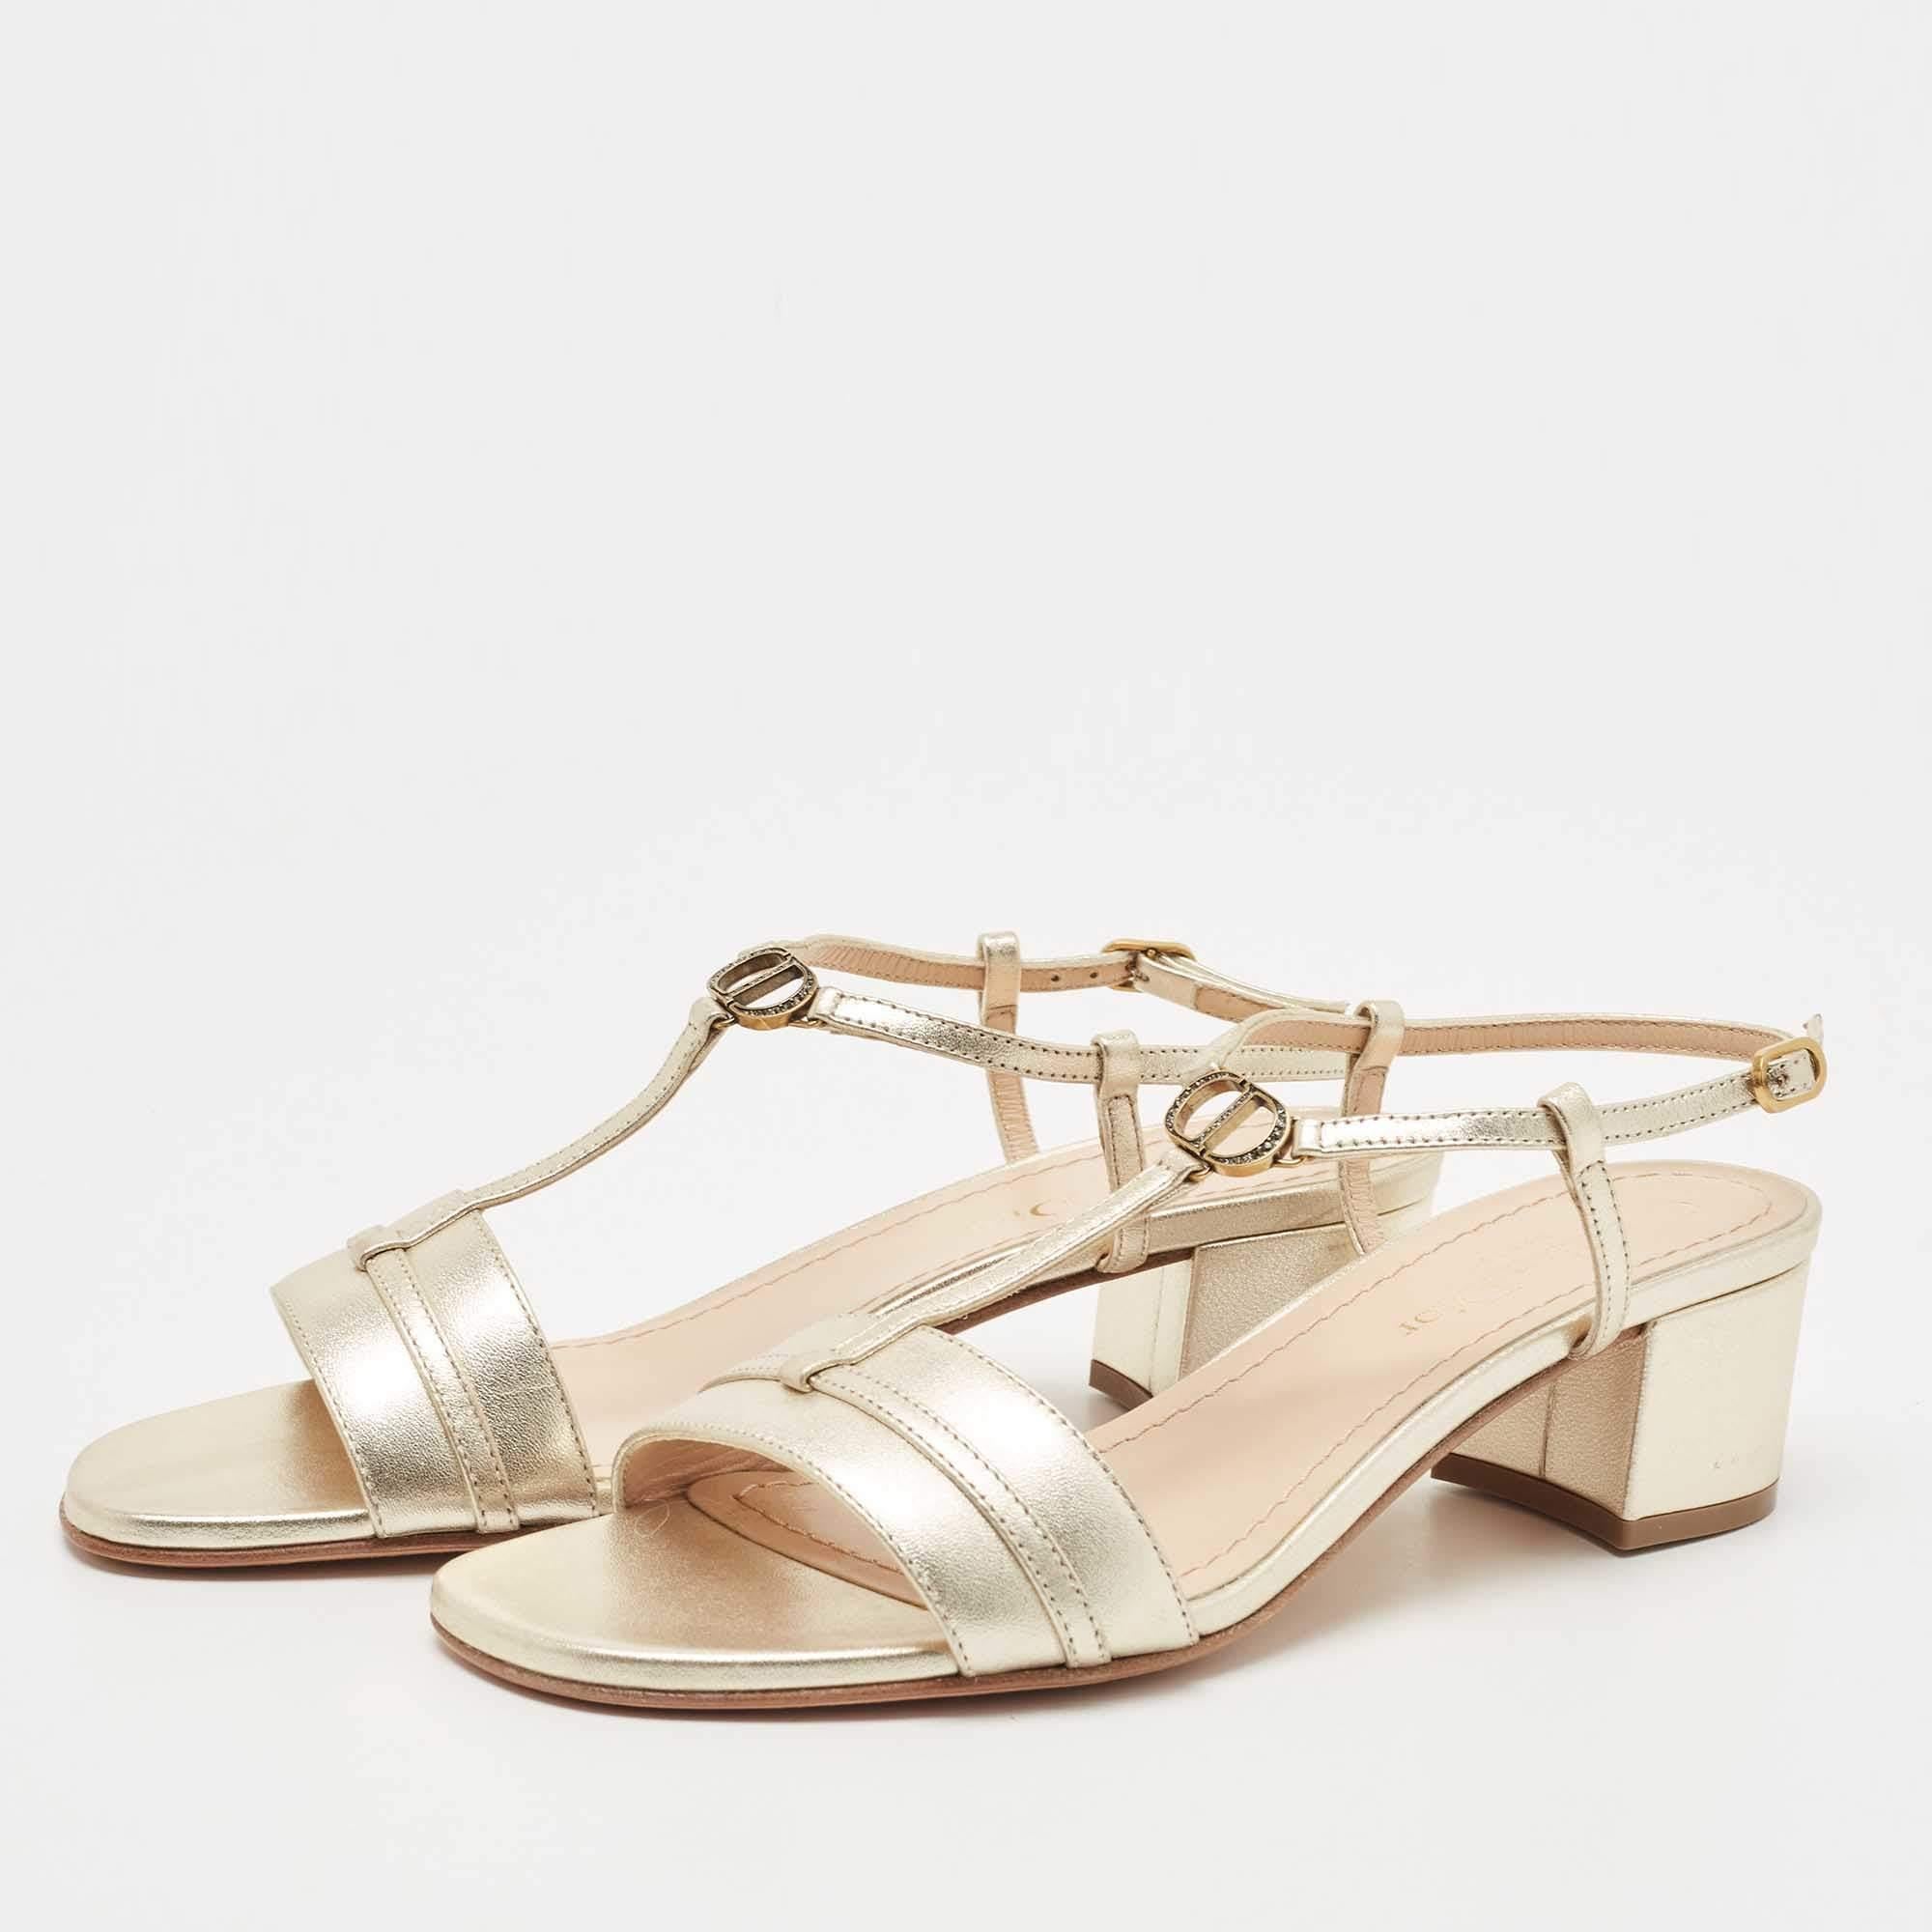 These Dior sandals will frame your feet in an elegant manner. Crafted from quality materials, they flaunt a classy display, comfortable insoles & durable heels.

Includes: Original Dustbag